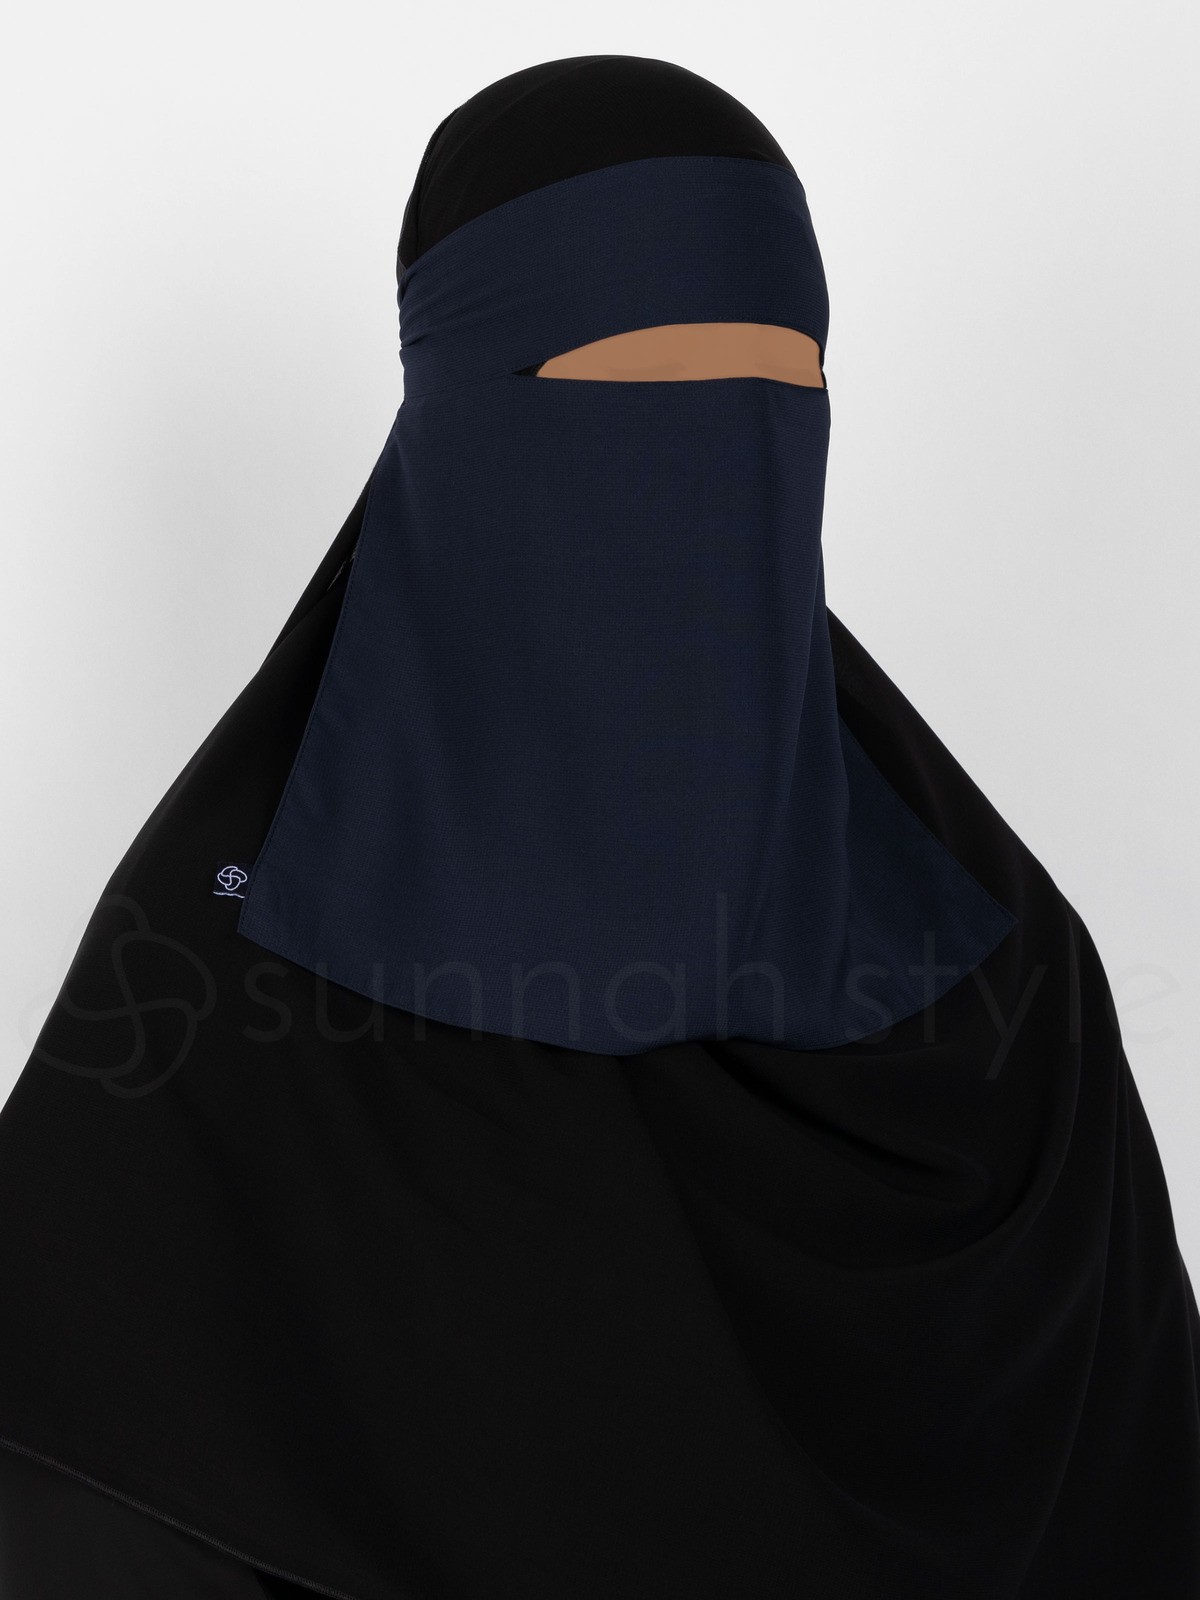 Sunnah Style - Short One Layer Niqab (Navy Blue)